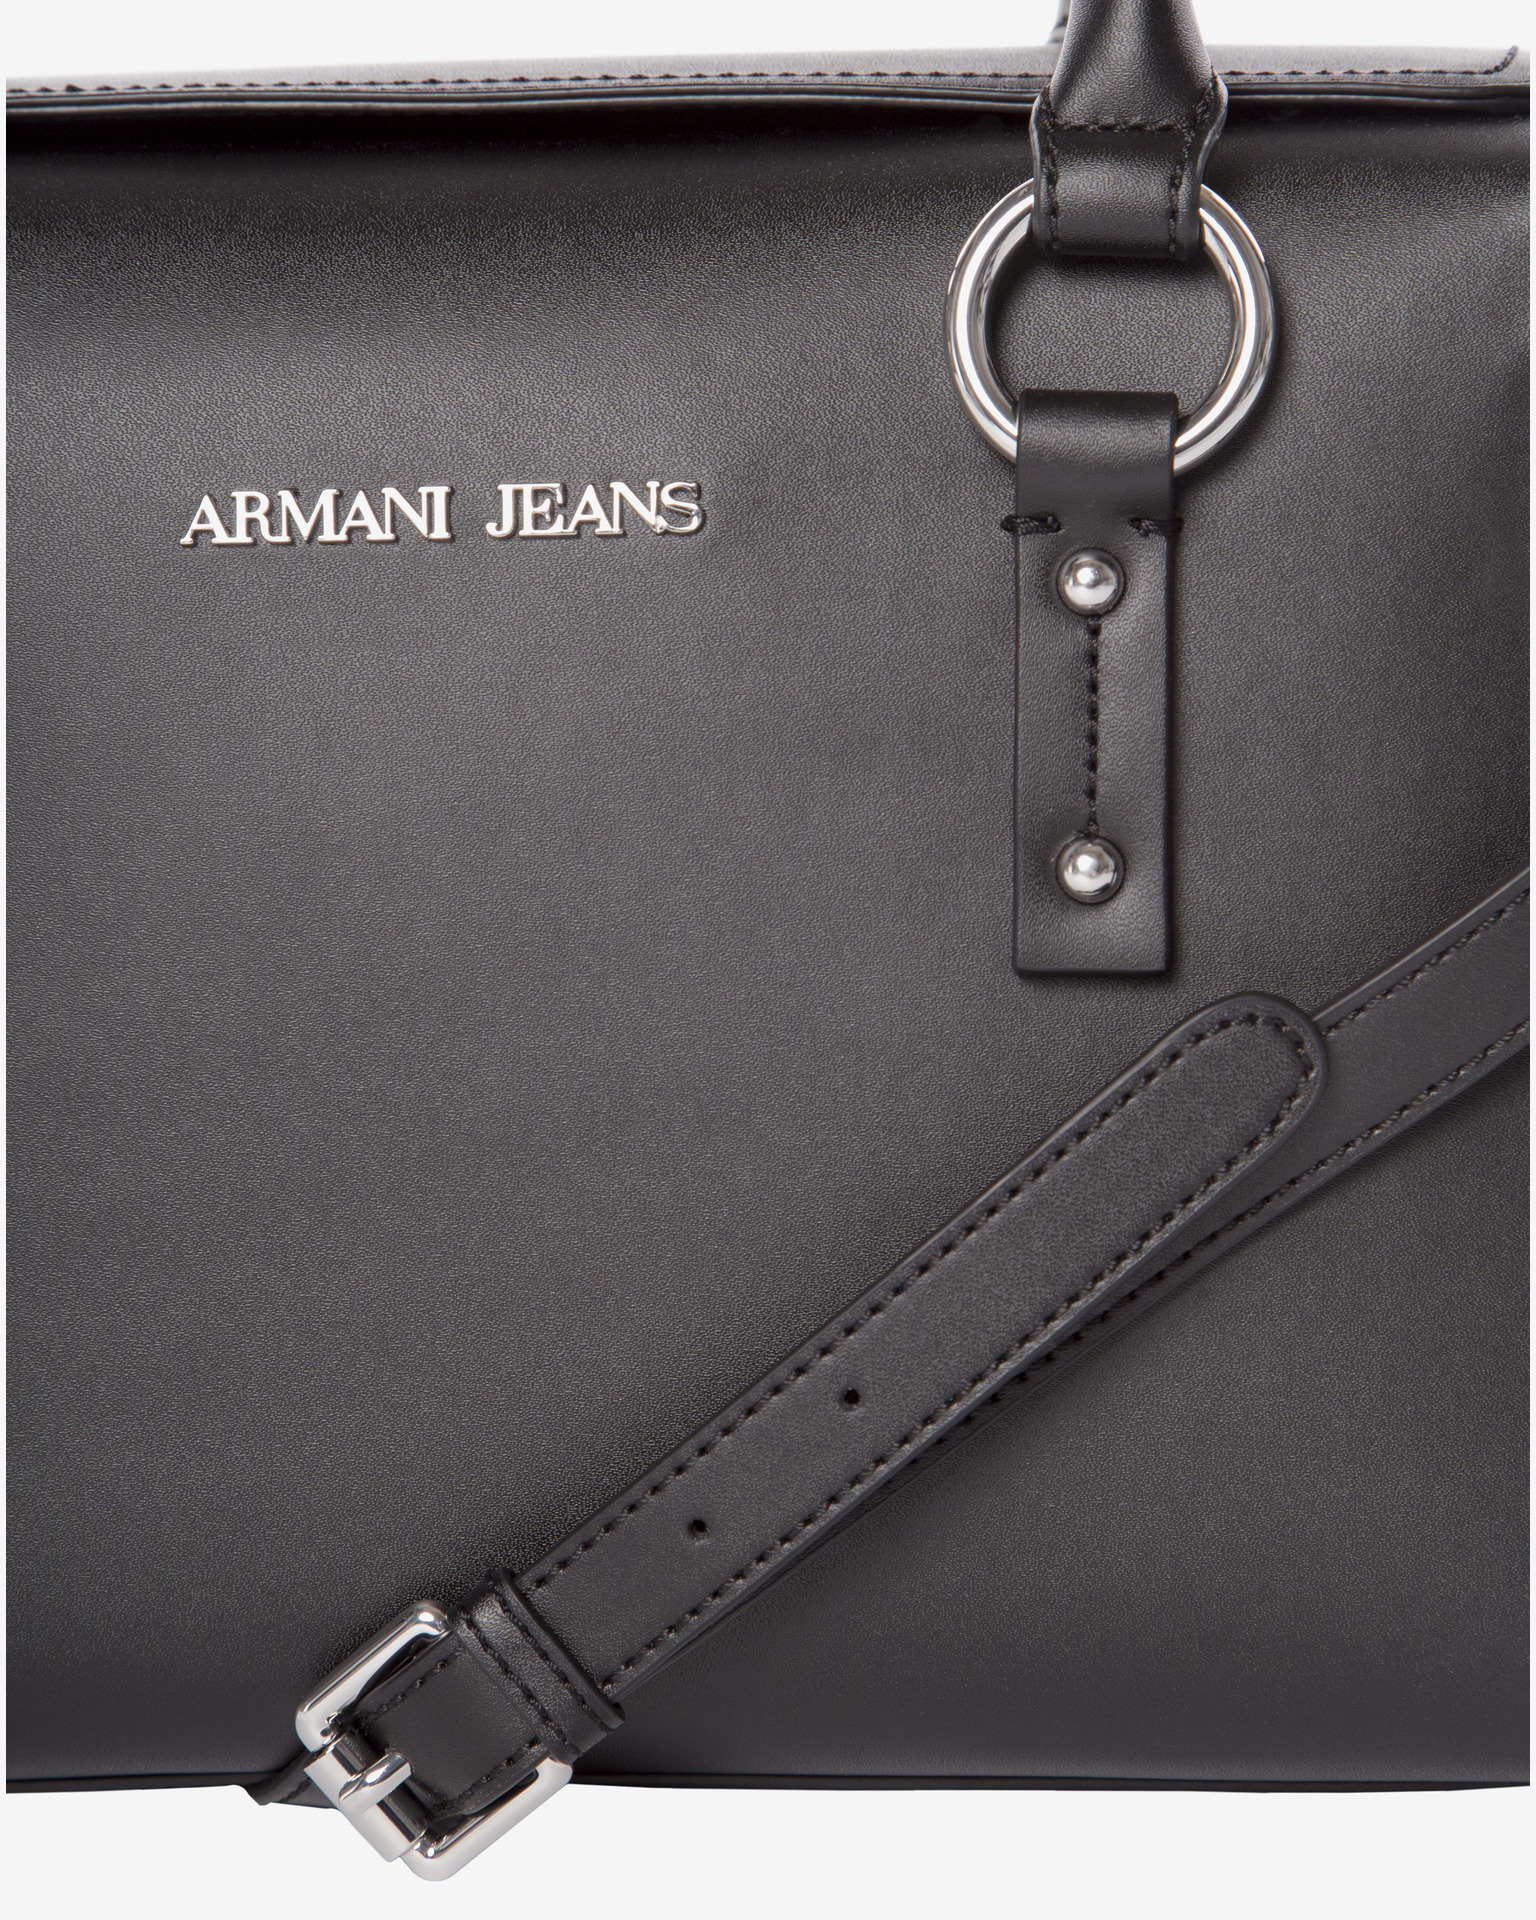 Armani Jeans Large Patent Tote Bag in Black ($215) ❤ liked on Polyvore  featuring bags, handbags, tote bags, black, handbags totes, patent pu… |  Bags, Tote bag, Tote